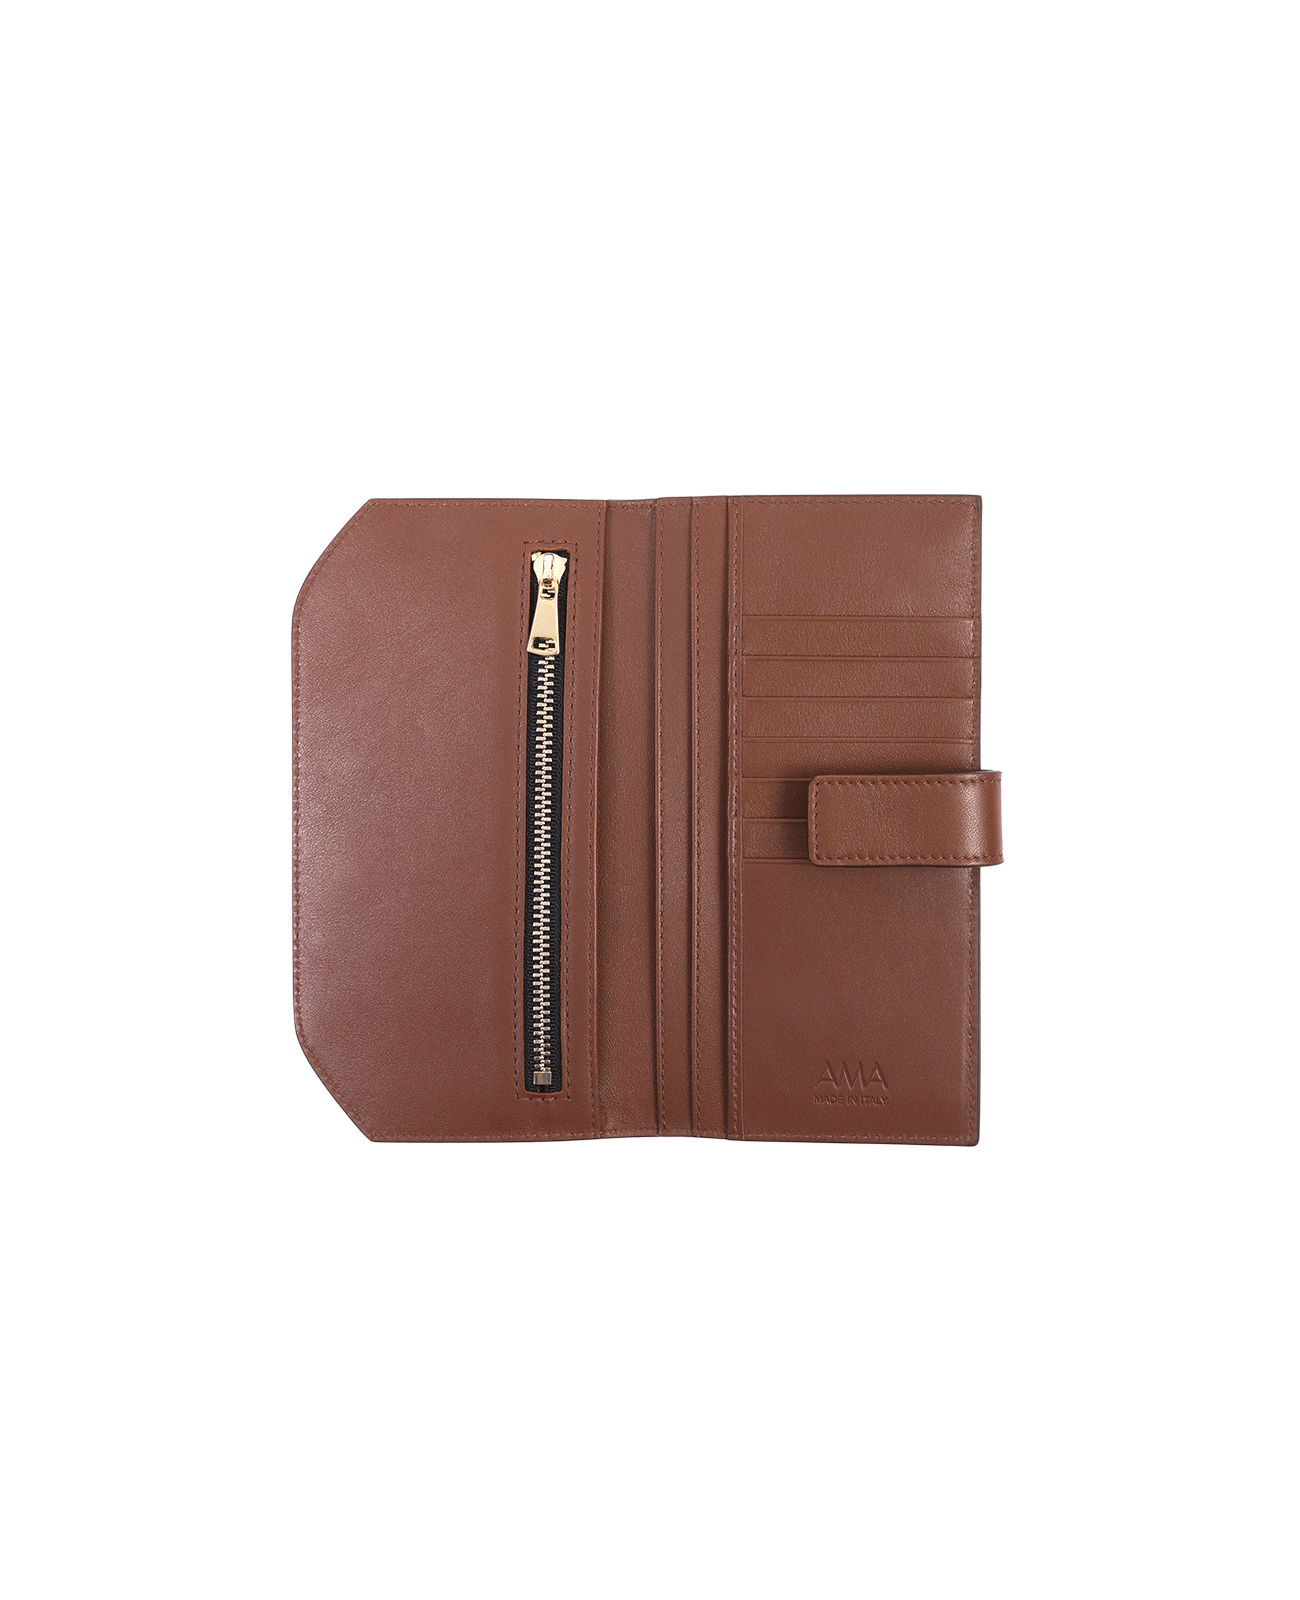 Wallet in Italian full-grain leather. Designed to carry your personal items. Available in a variety of styles and designs. Color: Mocha. Size: Medium